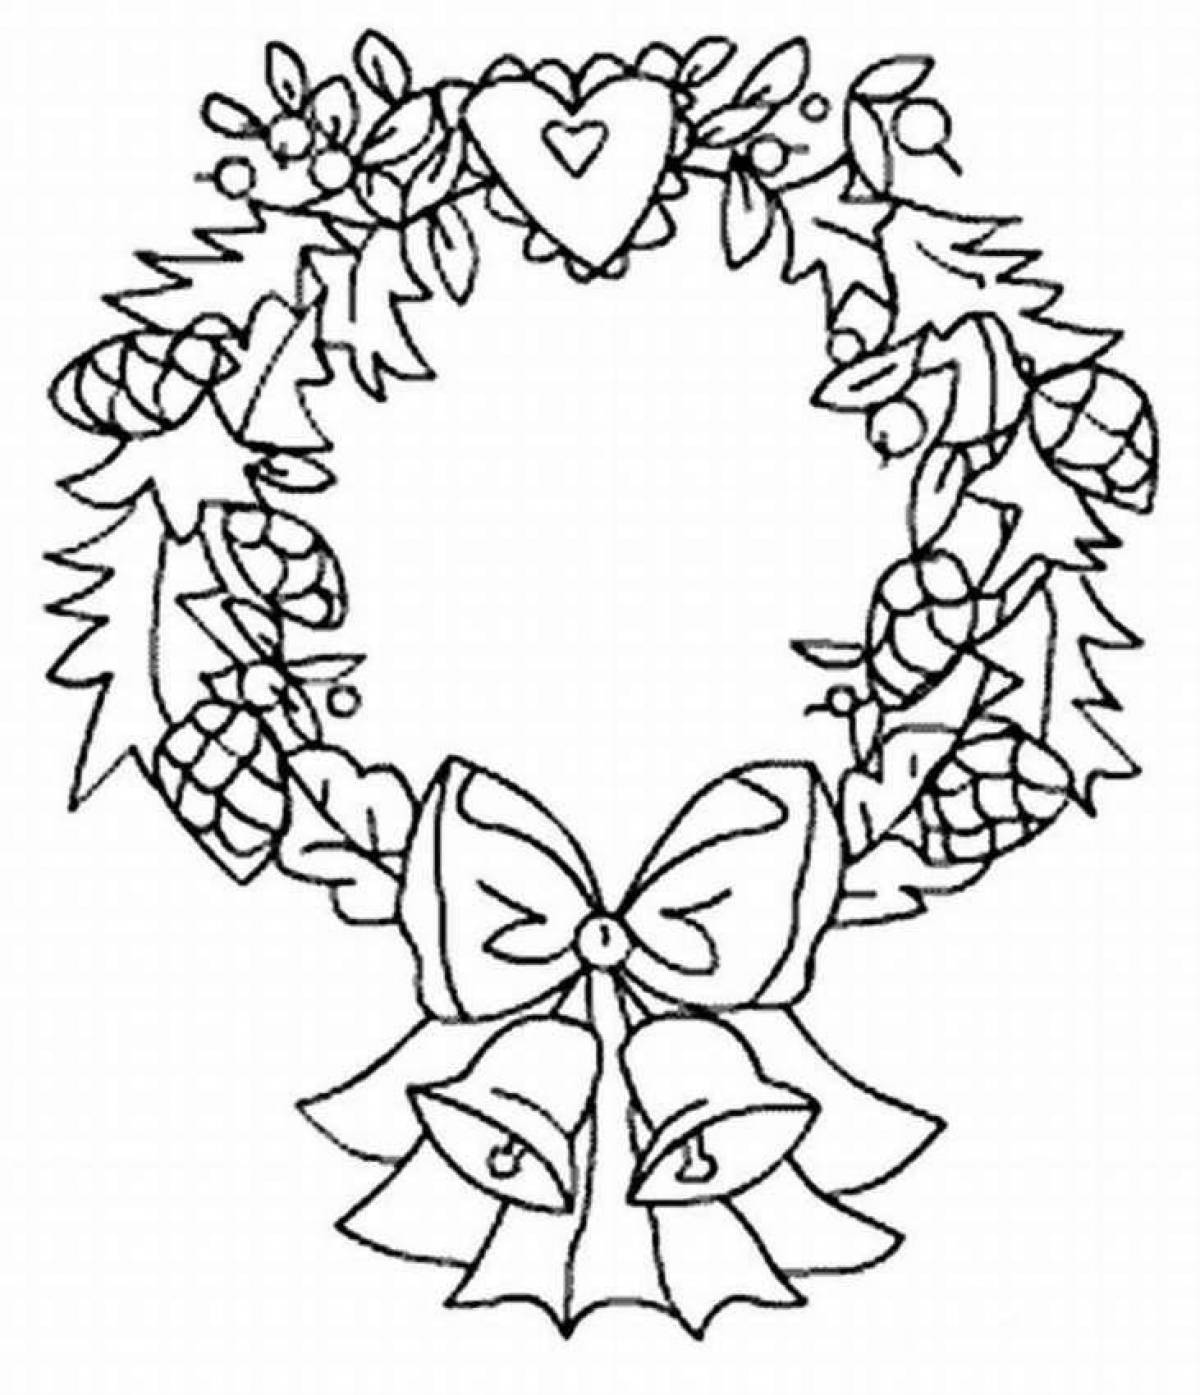 Coloring book exquisite Christmas wreath